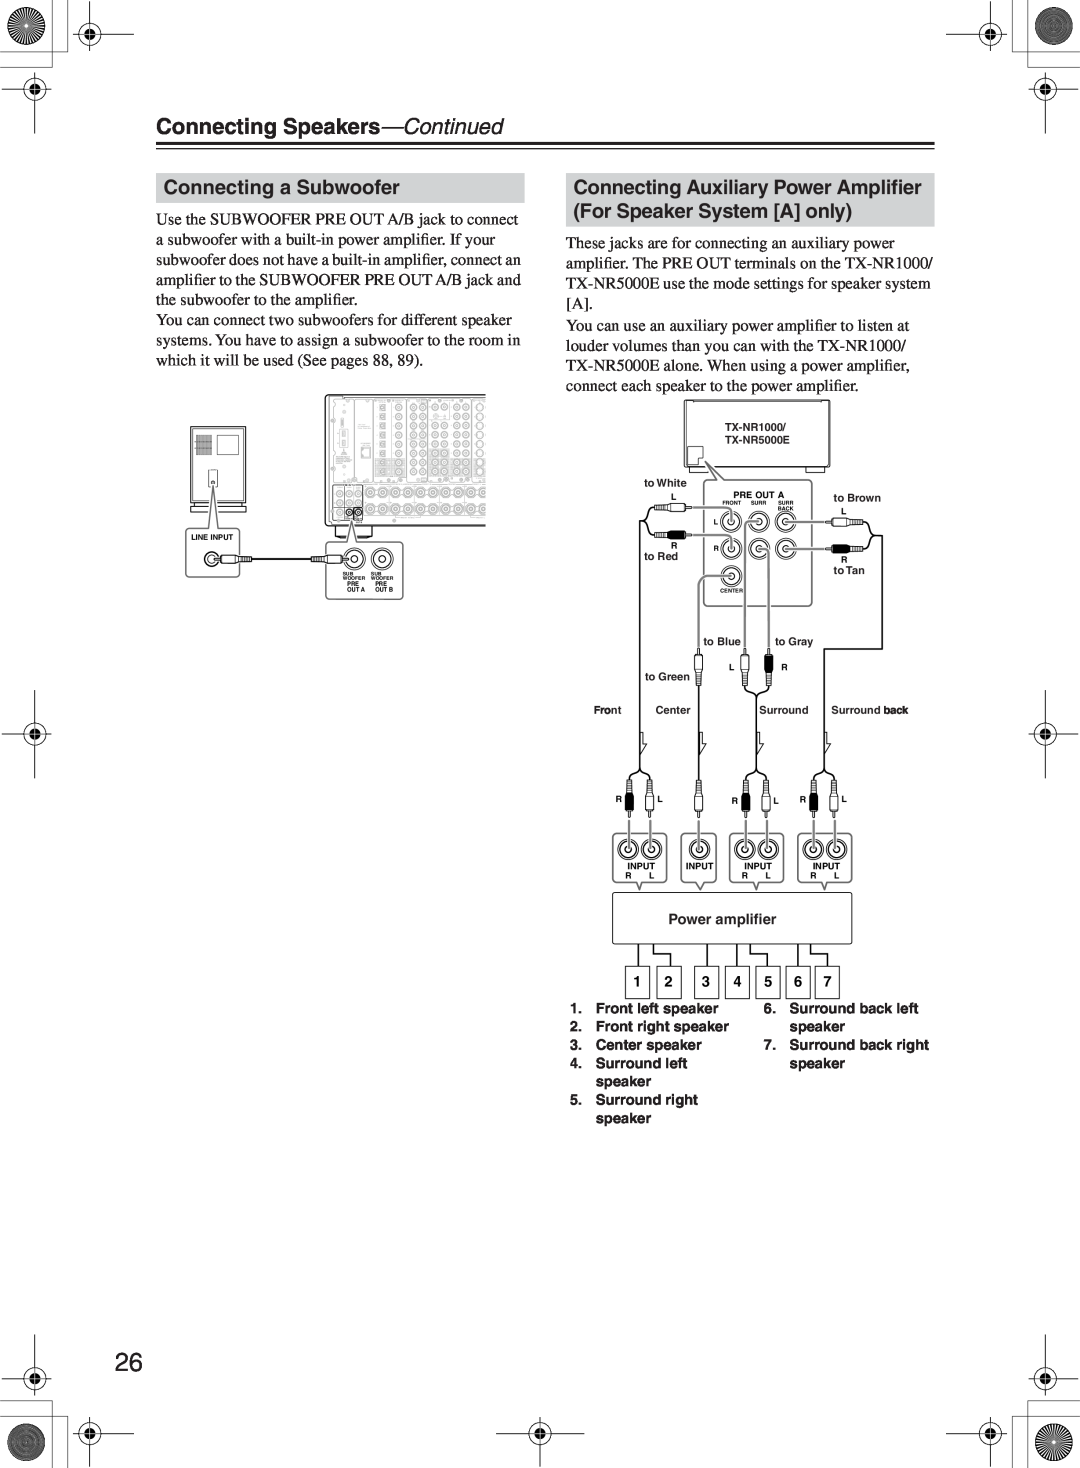 Onkyo TX-NR1000 instruction manual Connecting Speakers—Continued, Connecting a Subwoofer 